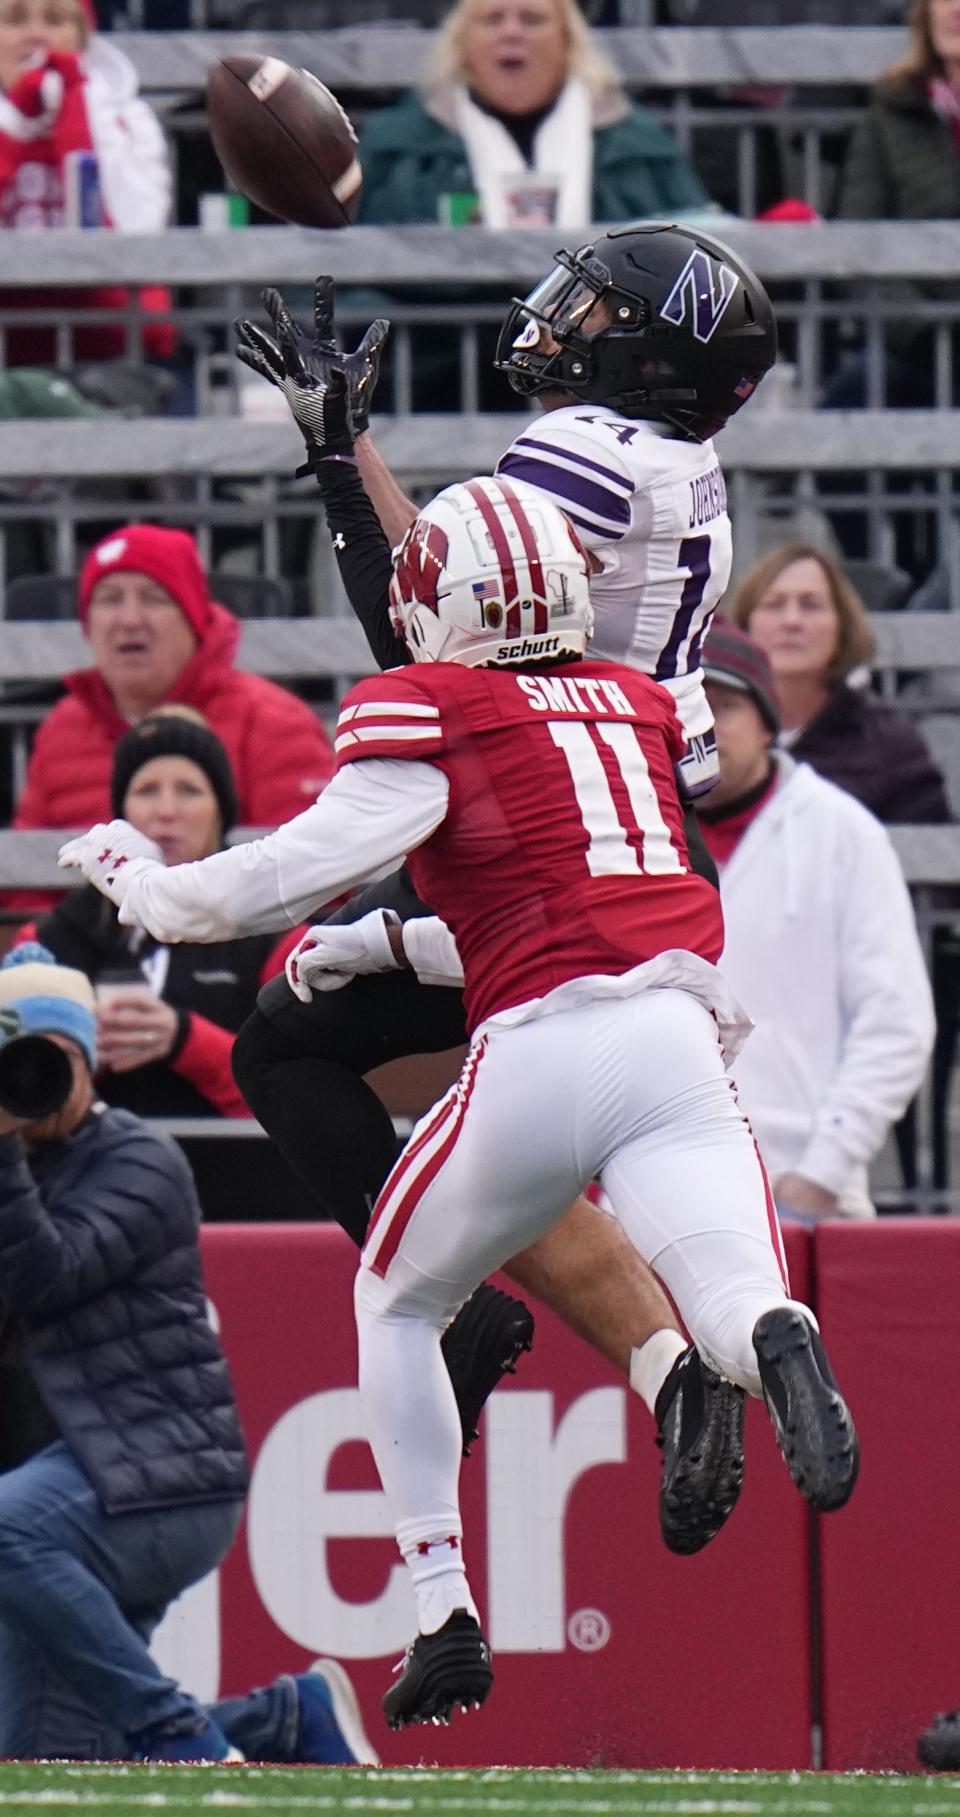 Northwestern wide receiver Cam Johnson catches a touchdown pass against Wisconsin cornerback Alexander Smith during the second quarter of their game Saturday.